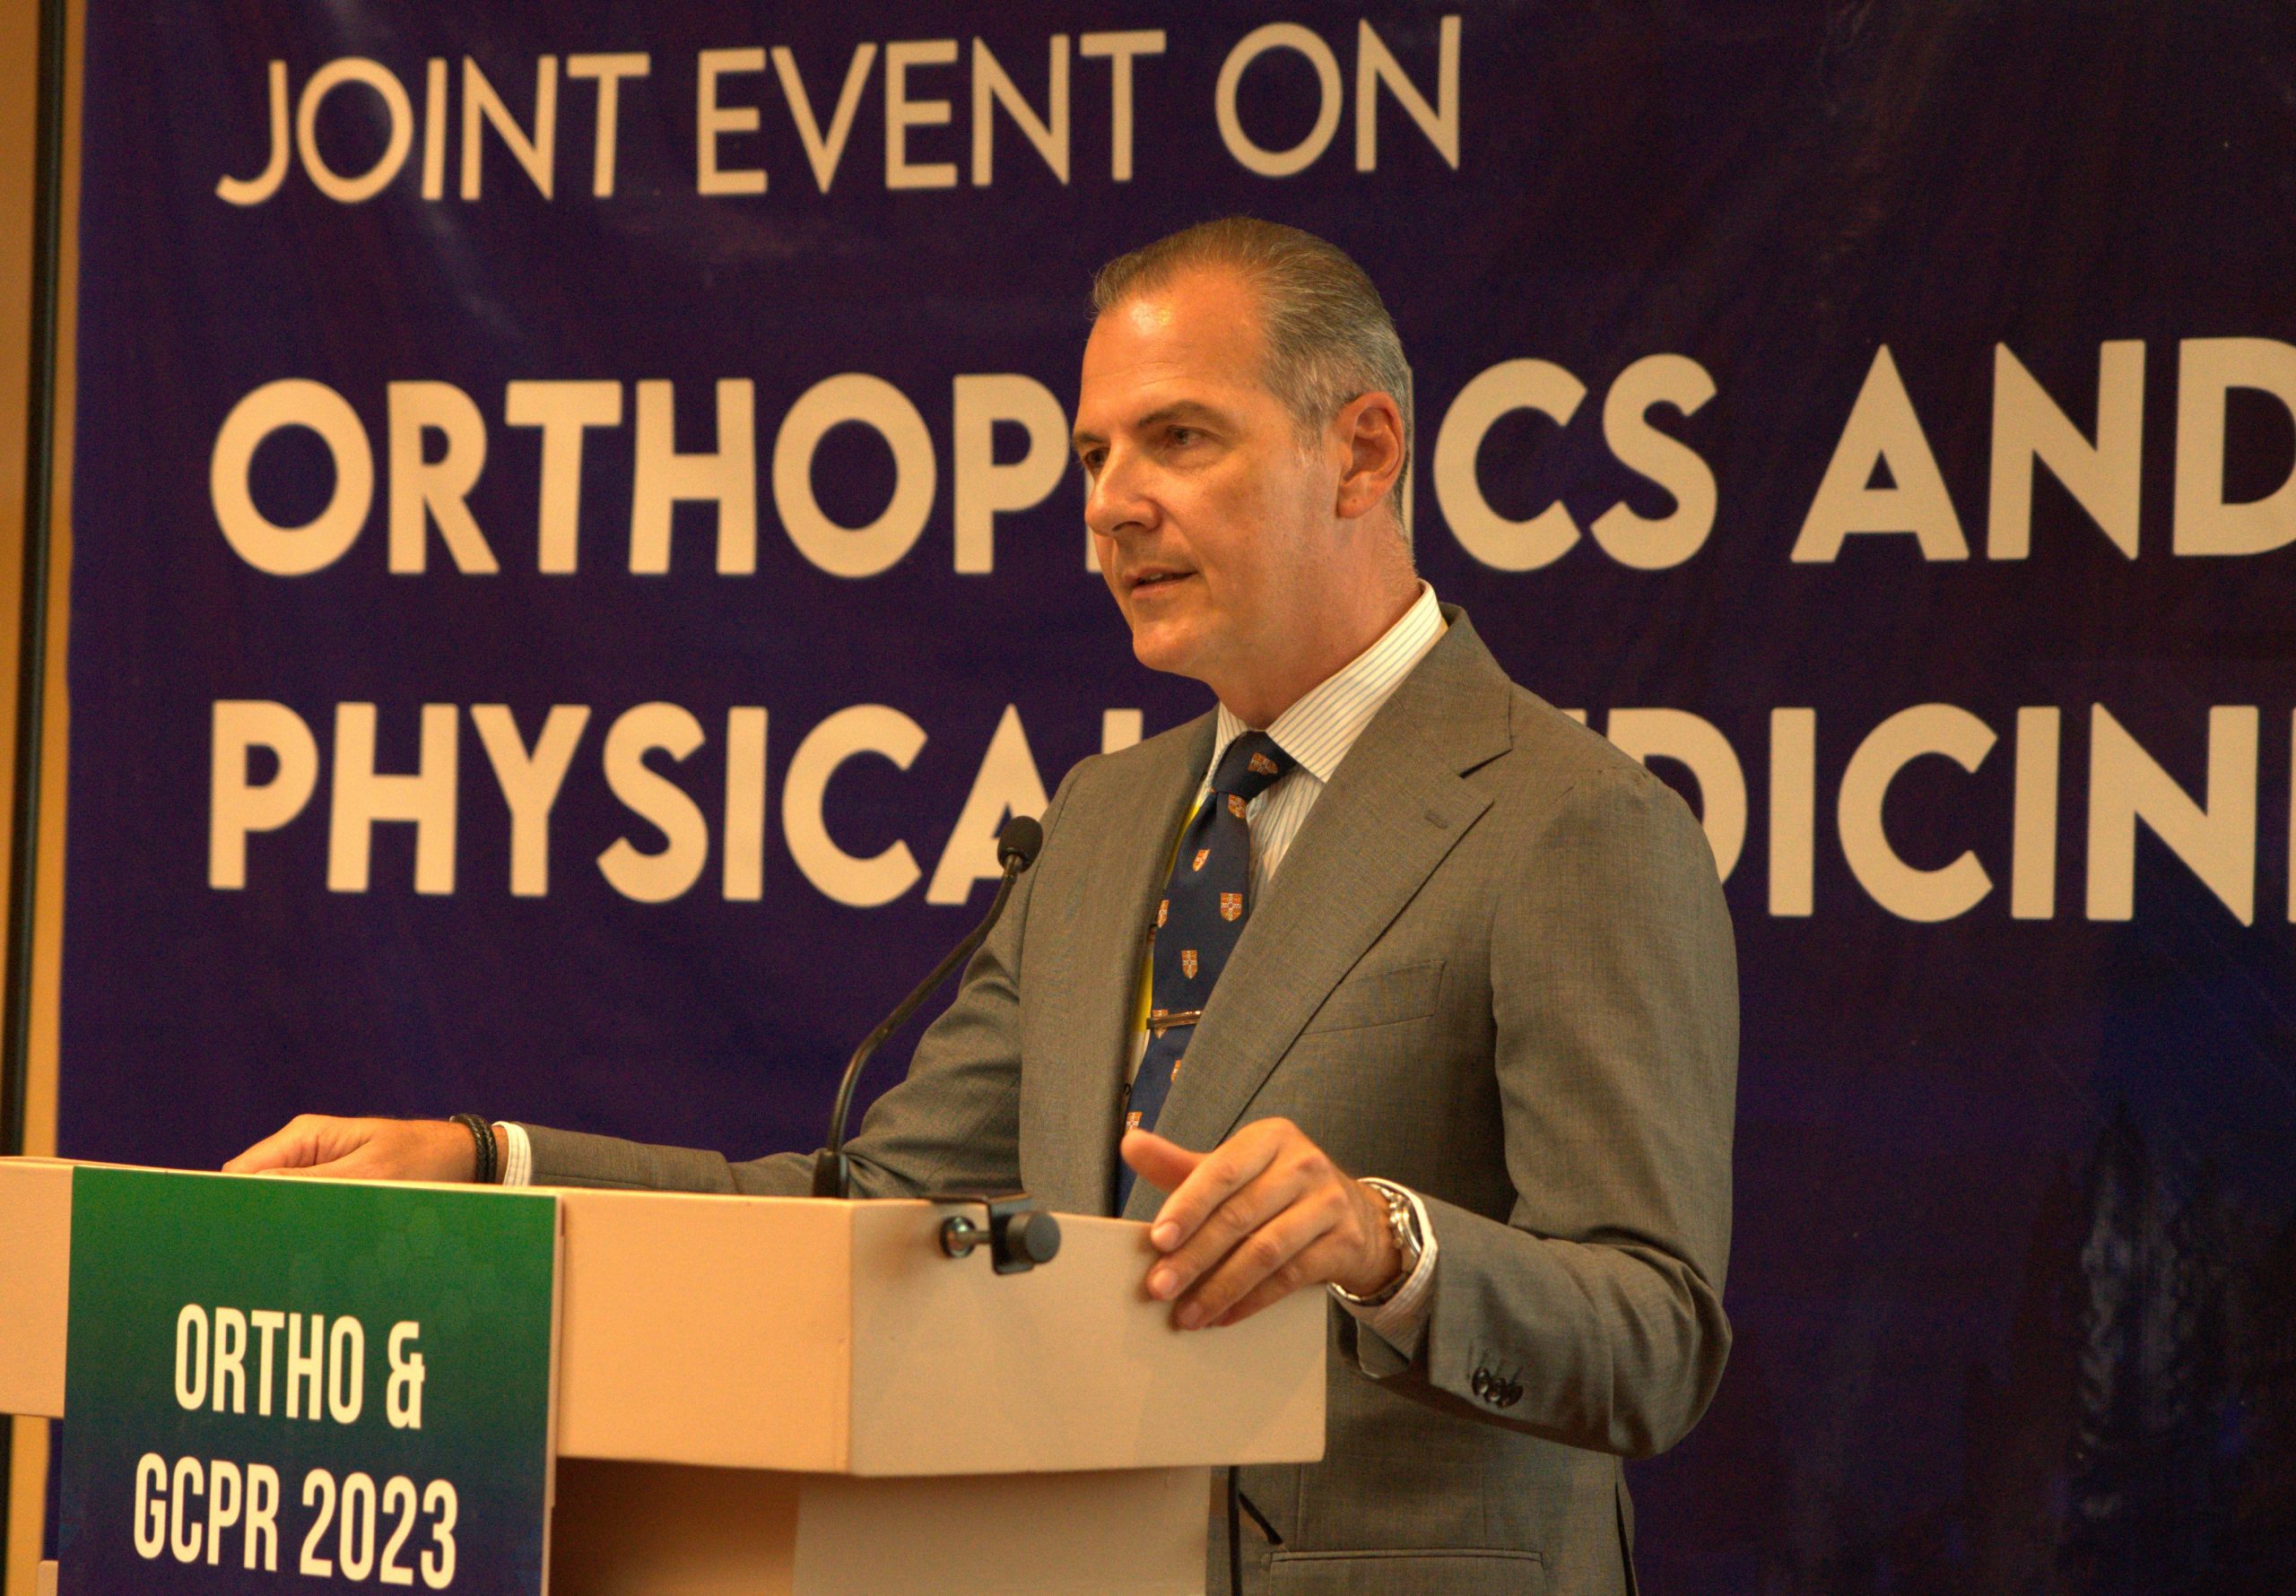 Watch online Dr Giotikas' lecture at the World Orthopaedic Conference 2023 in London